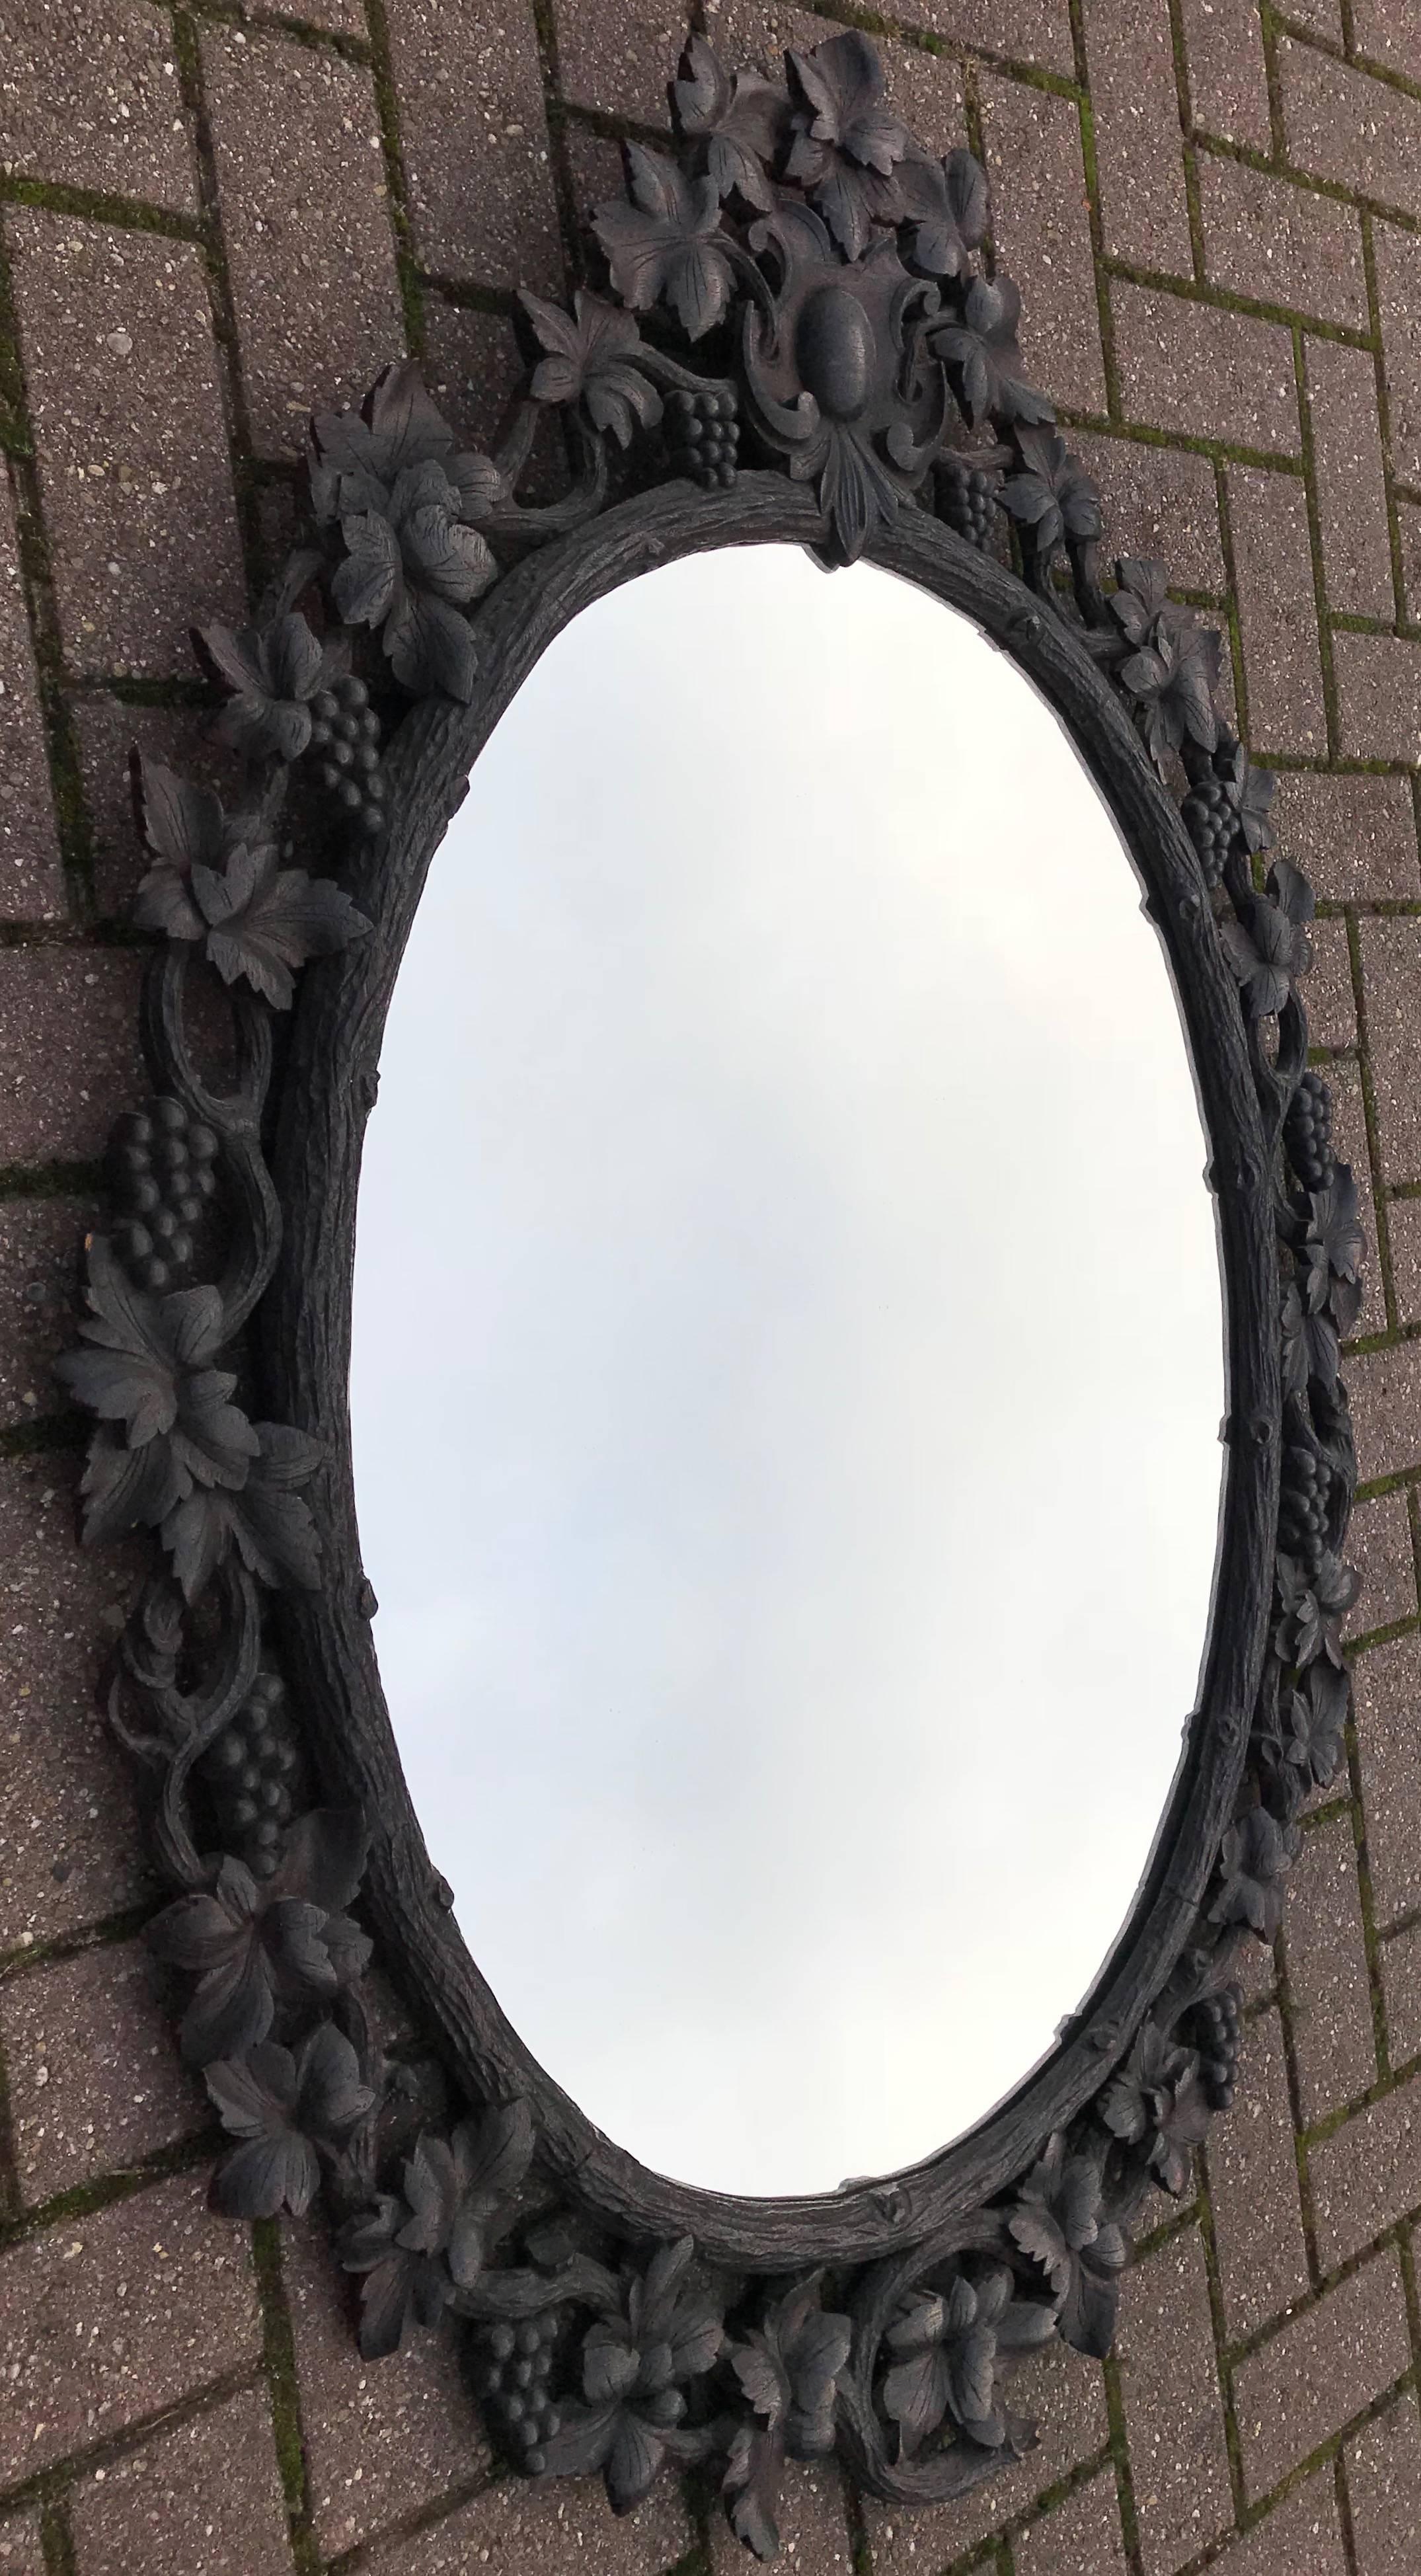 19th Century Large Antique Black Forest Oval Mirror in Carved Nutwood Picture Frame